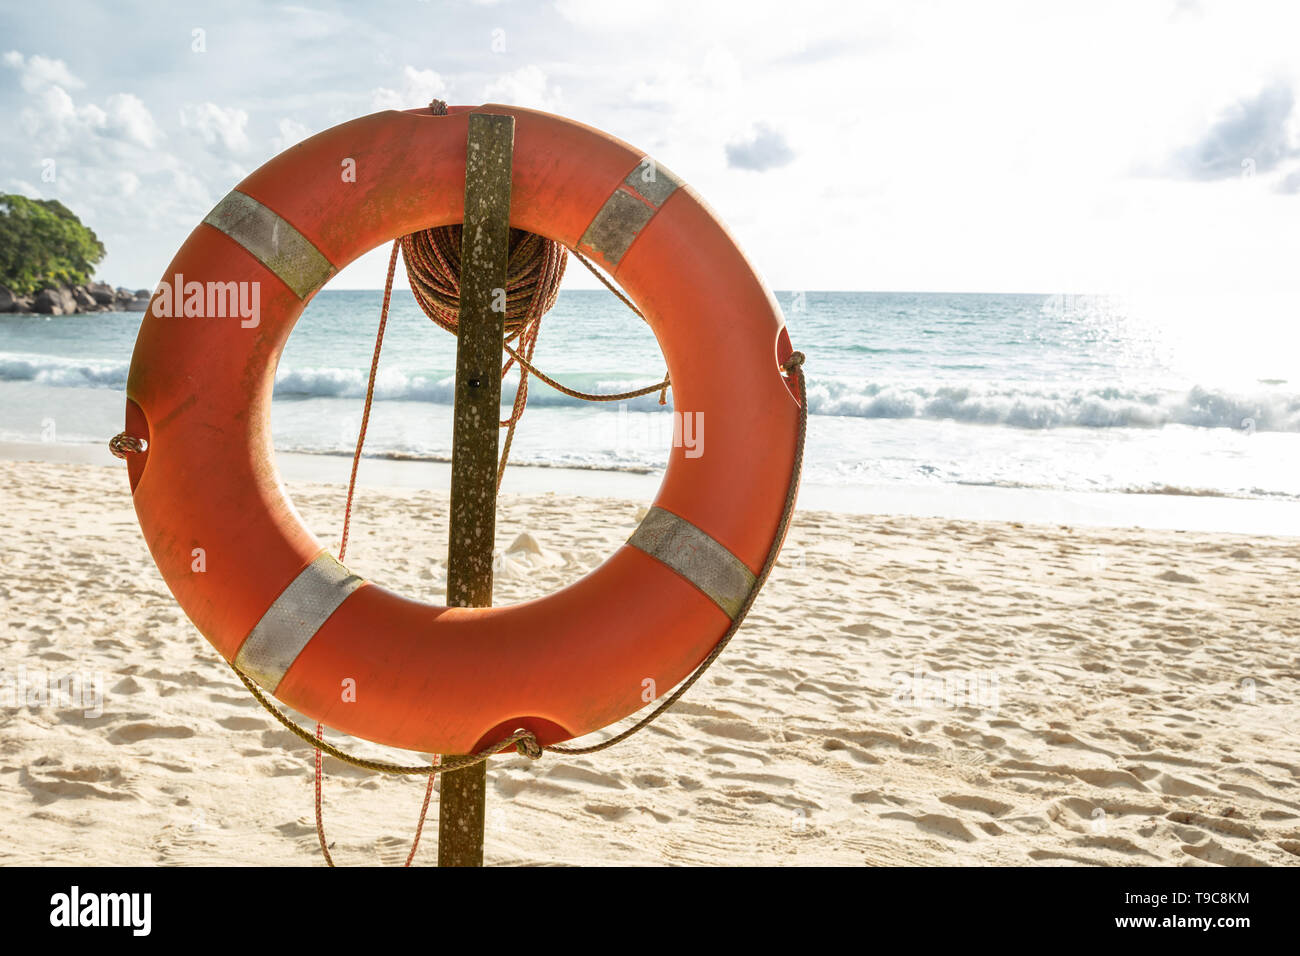 Close-up Of An Orange Lifebuoy In Front Of Sea At Beach Stock Photo